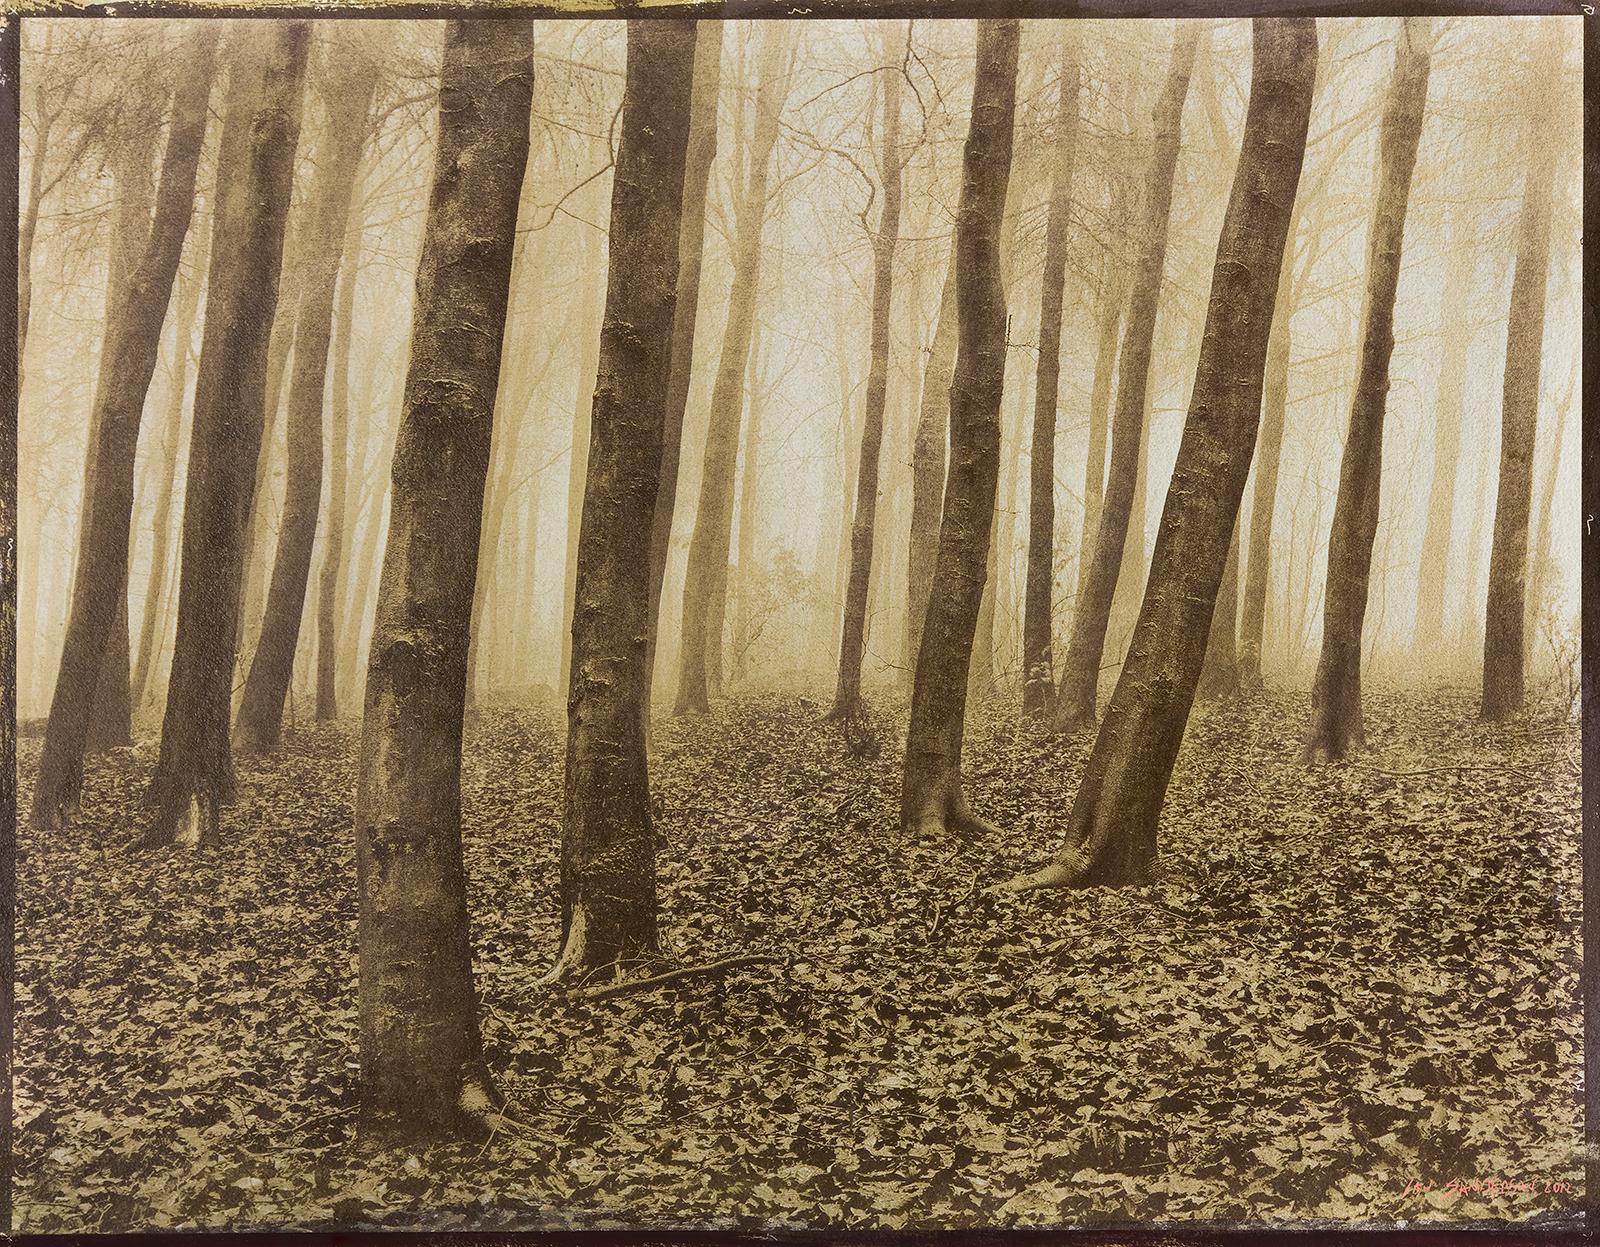  Wood - Signed limited edition archival pigment print  -   Edition of 8  
Photography  and Bichromate print : 2012
Pigment print : 2018

Several negatives was used to create a handmade print with a 19th. century technique involving light sensitive